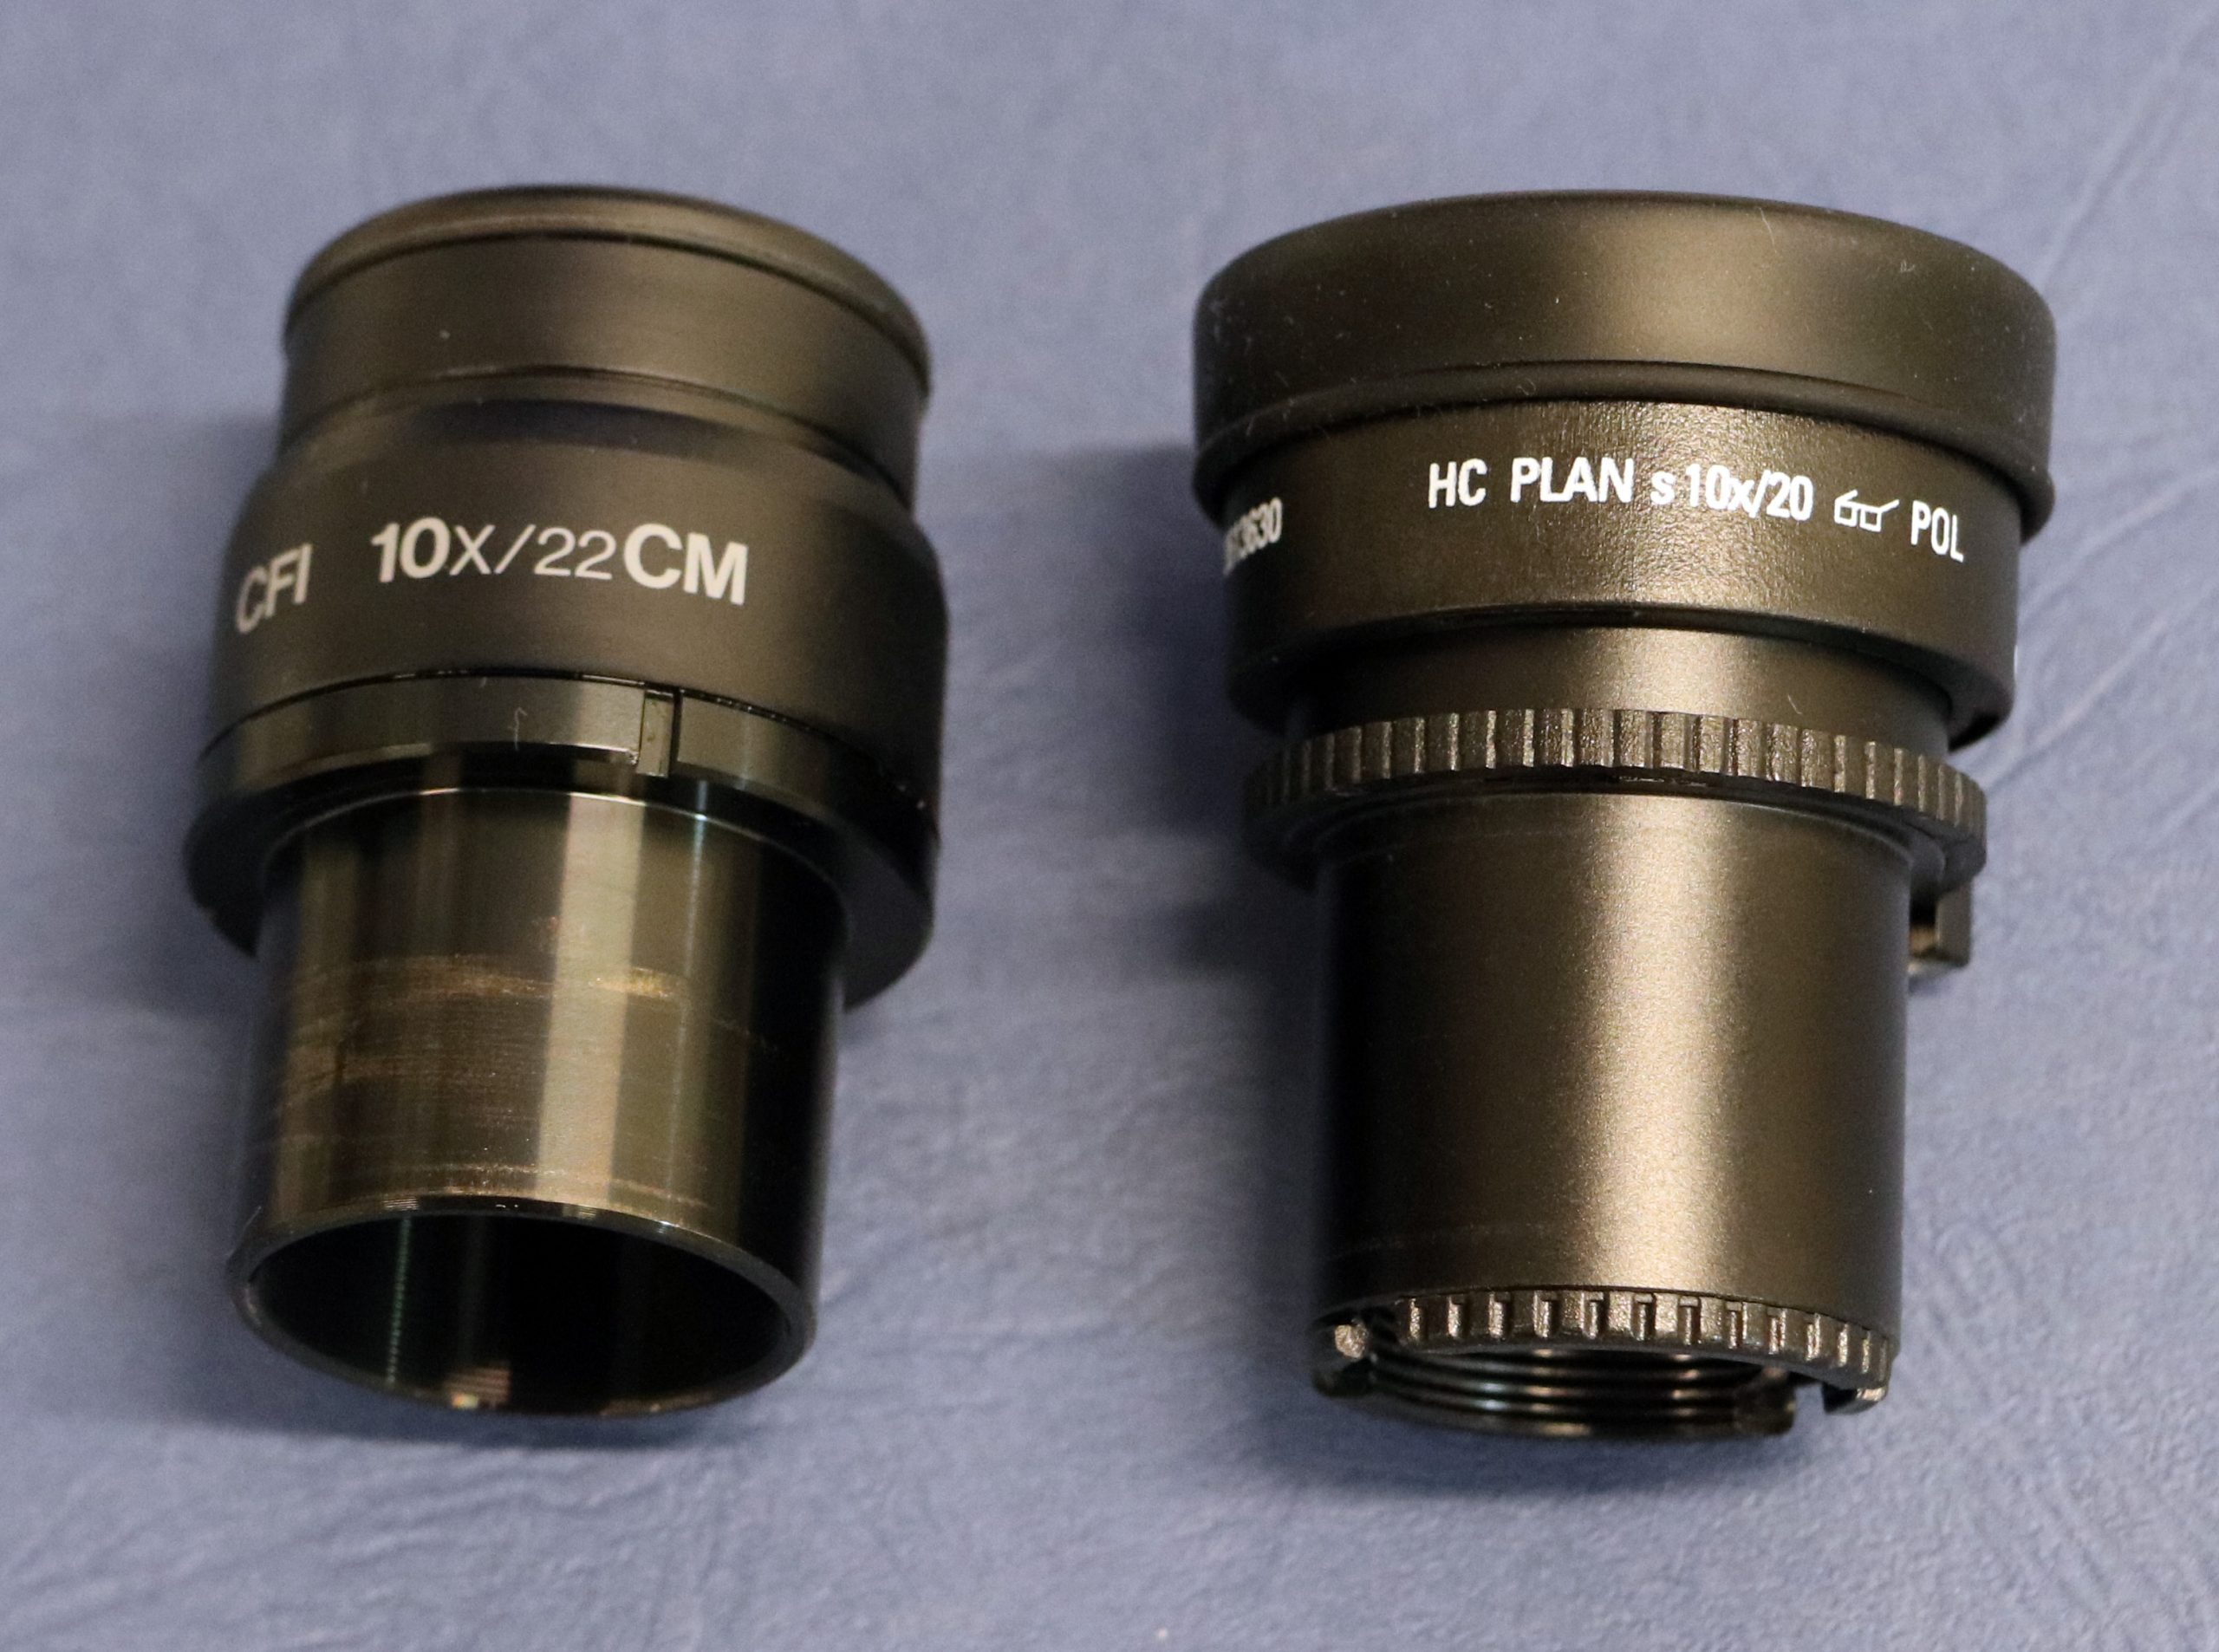 Figure 2.4.15. Eyepieces or oculars removed from two different brands of polarizing light microscope. The magnification (10x) is marked on each ocular.